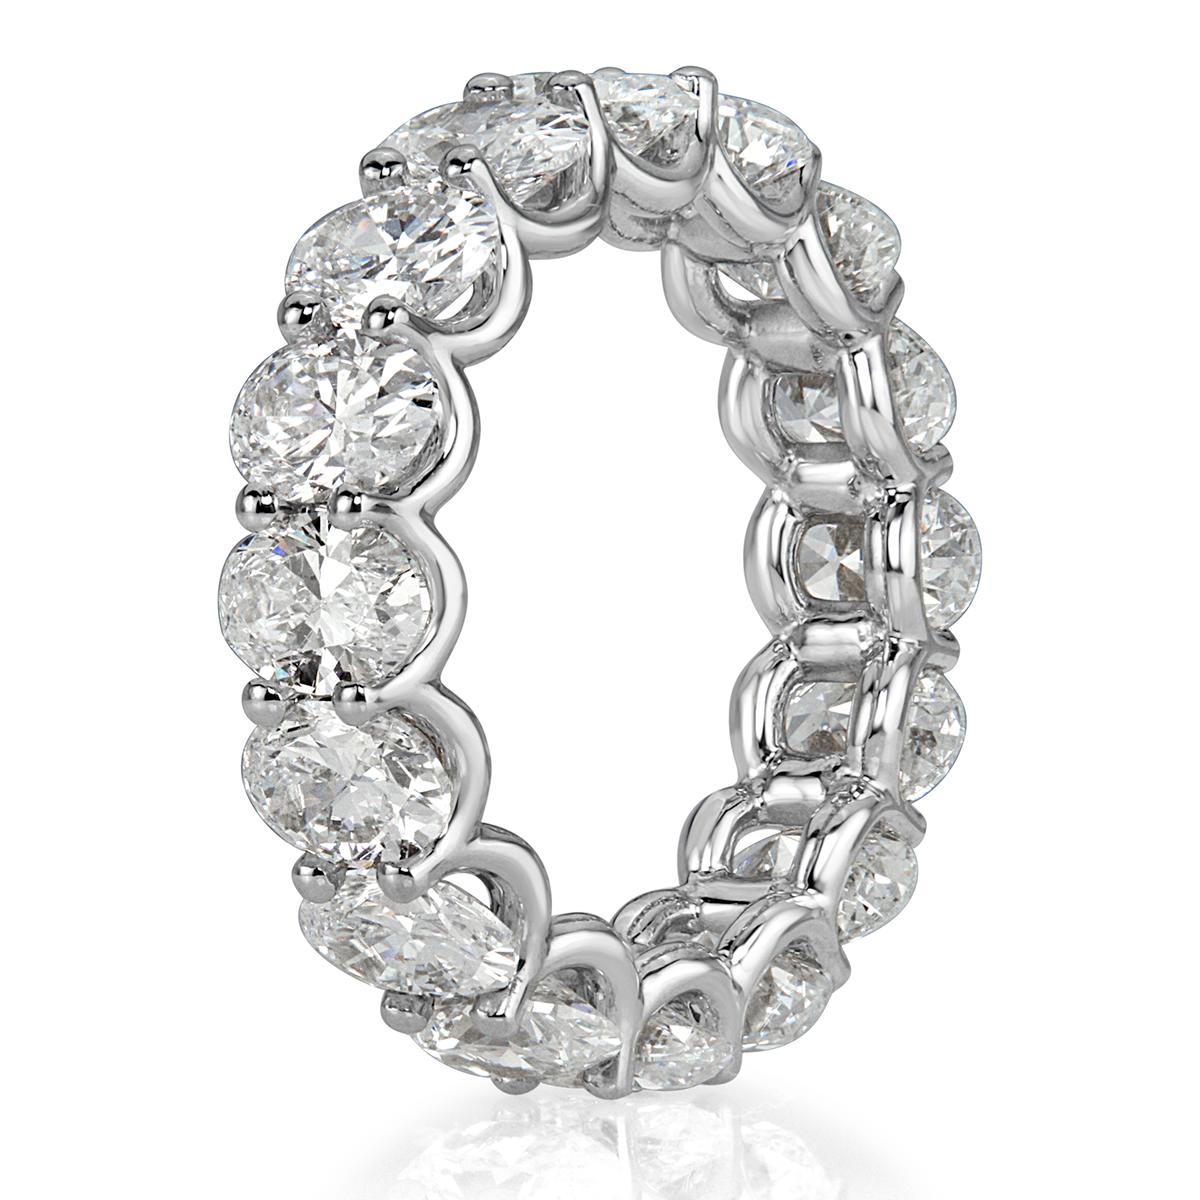 This stunning diamond eternity band showcases 6.45ct of oval cut diamonds graded at E-F, VS1-VS2. The diamonds are set in an 18k white gold, 